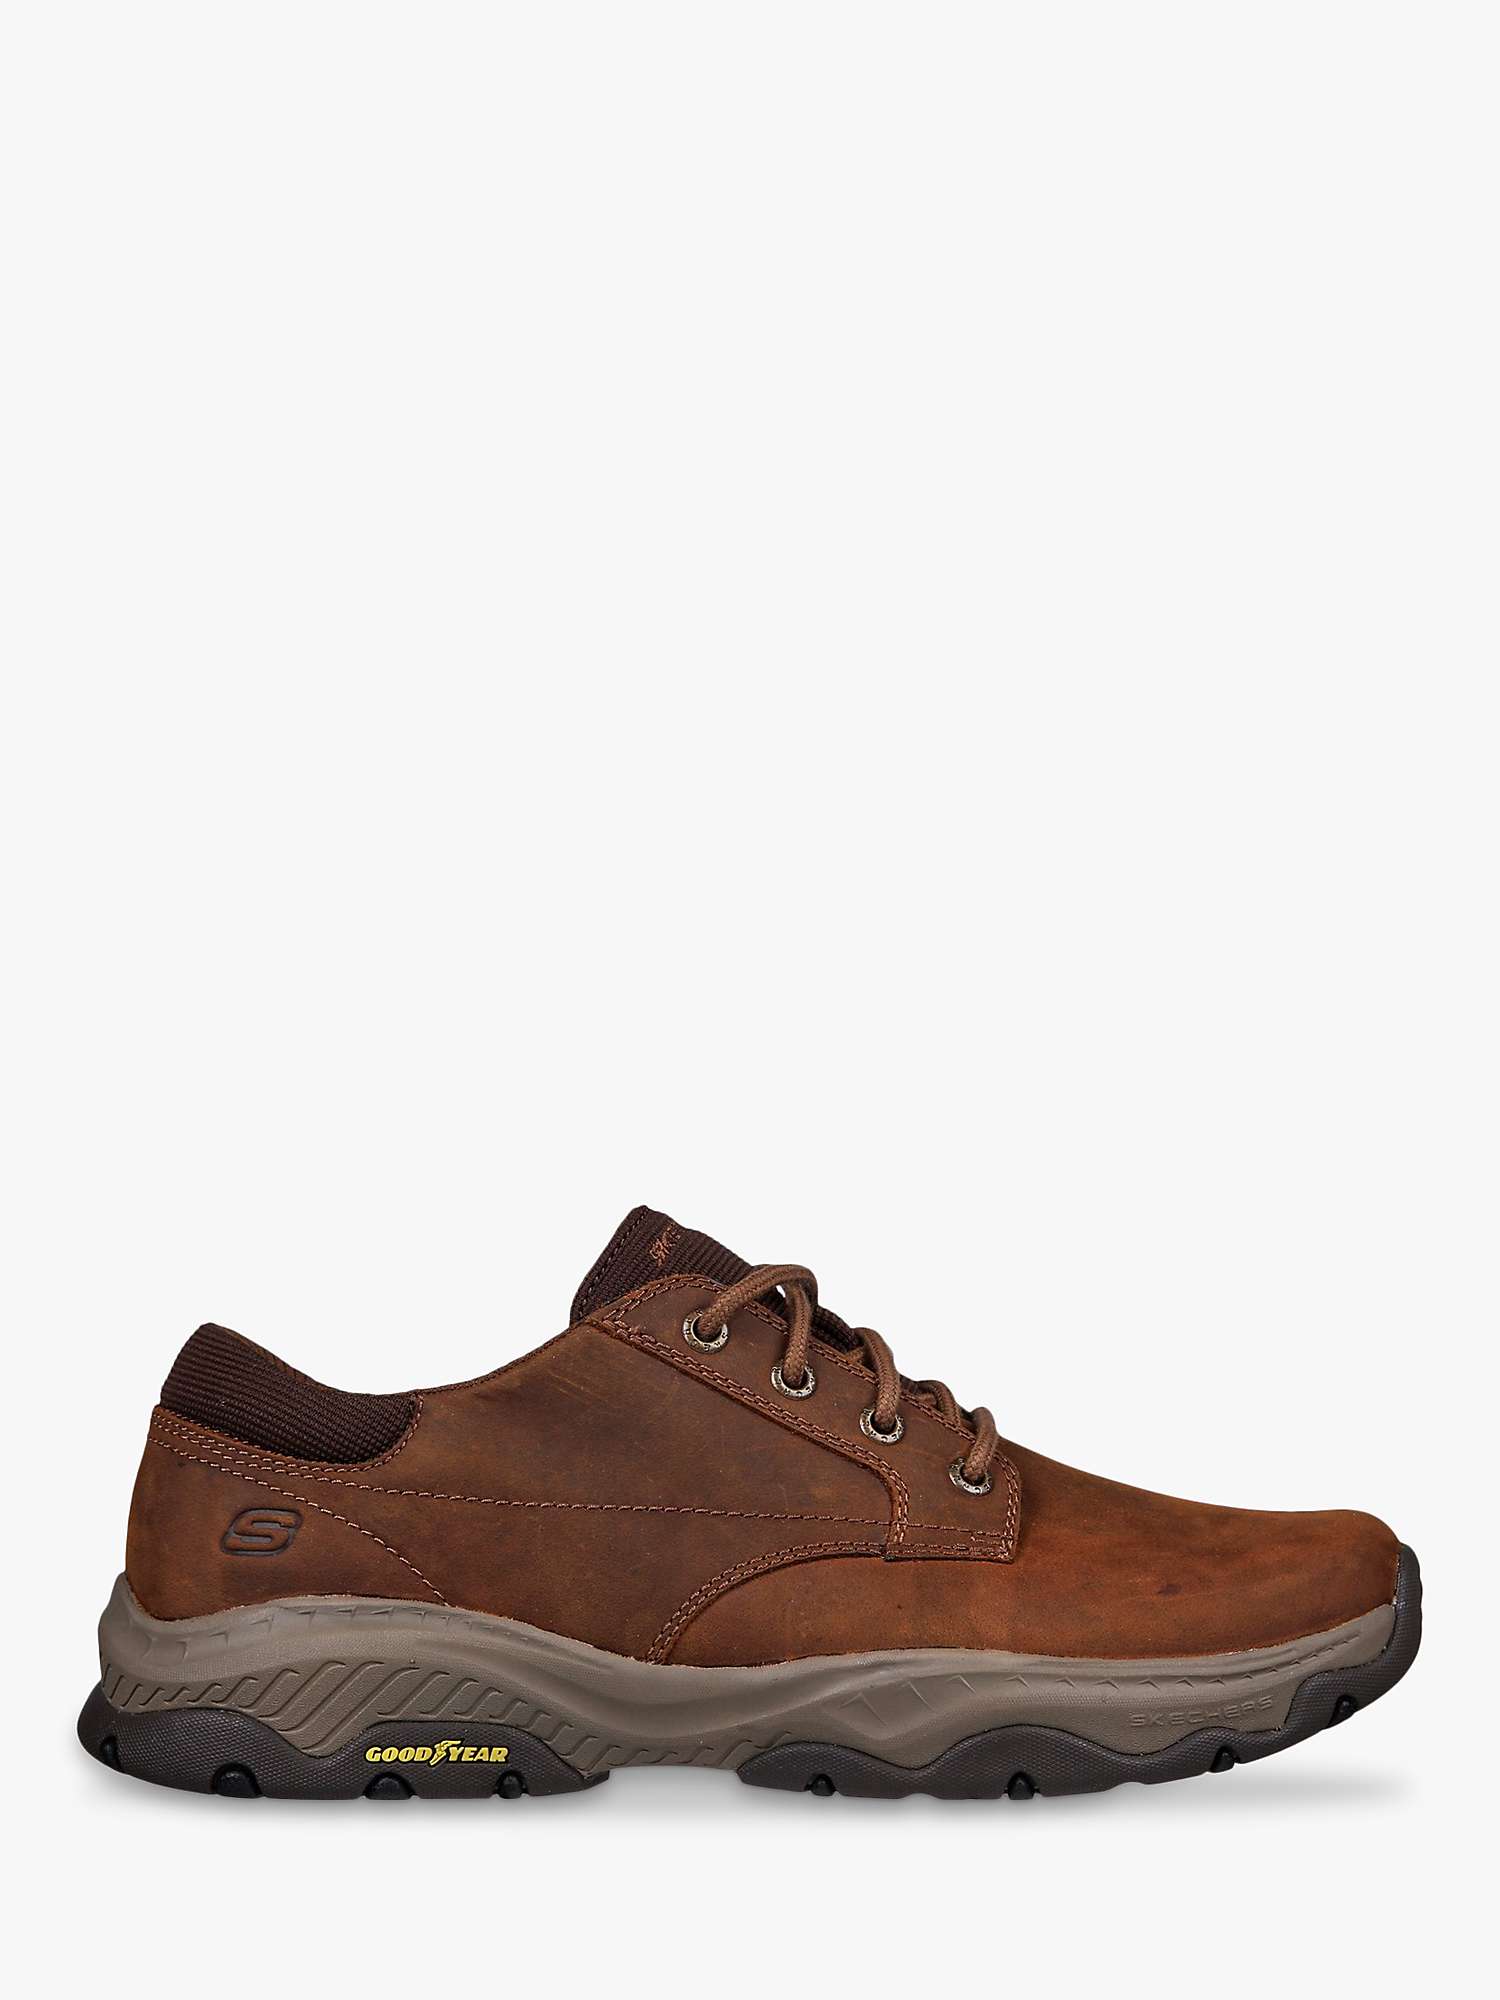 Buy Skechers Relaxed Fit Craster Fenzo Shoes, Dark Brown Online at johnlewis.com